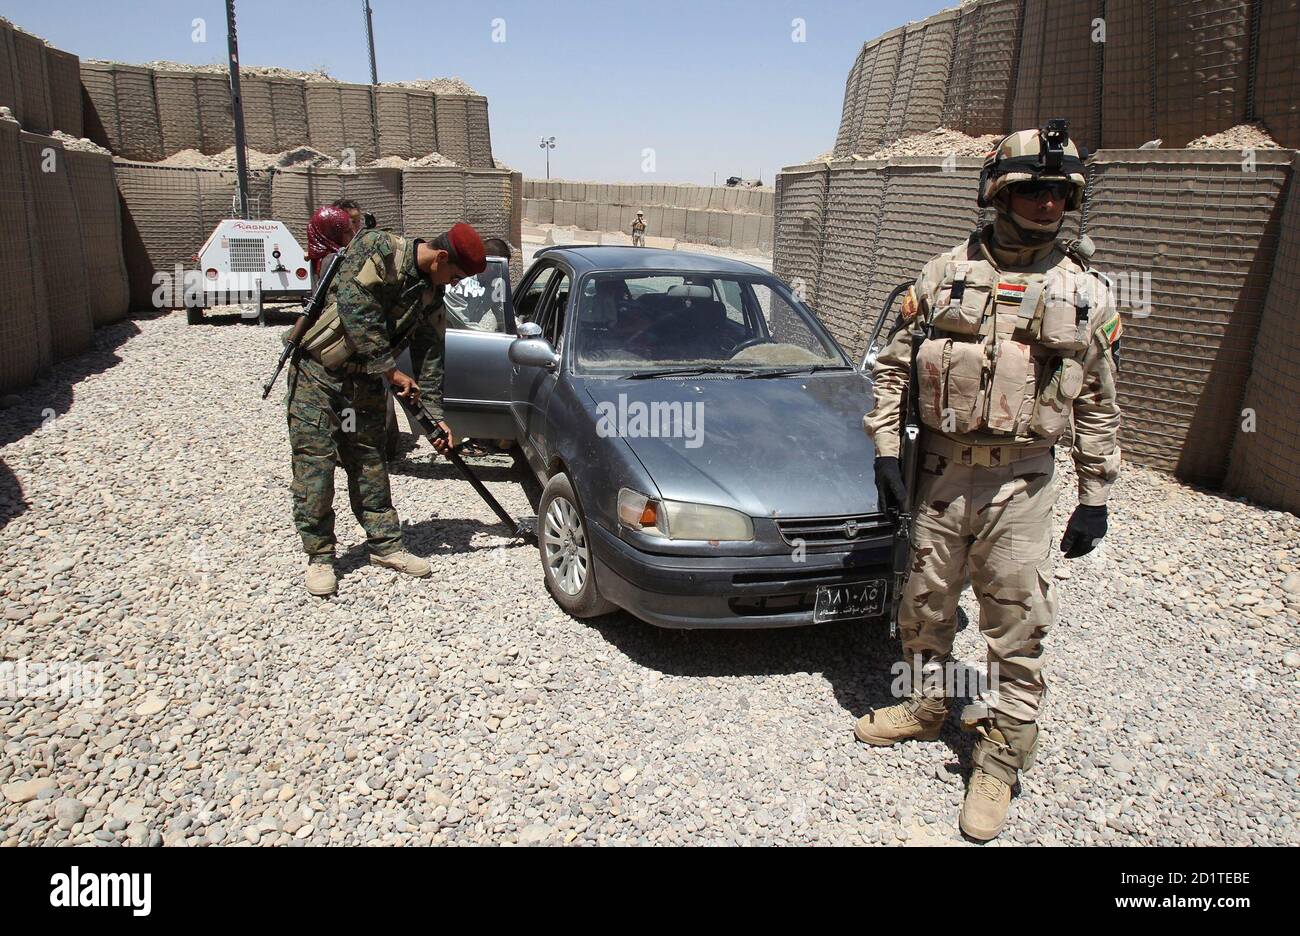 Iraqi security personnel search a vehicle at a checkpoint in the town of Jalawla, 115 km (71 miles) northeast of Baghdad June 28, 2010. Like other towns across Iraq's restive northern provinces of Diyala, Kirkuk and Nineveh, Jalawla defies the U.S. narrative of an end to combat operations next month under a plan to pull out of Iraq completely by the end of 2011. Picture taken June 28, 2010. REUTERS/Saad Shalash (IRAQ - Tags: CONFLICT MILITARY TRANSPORT SOCIETY) Stock Photo